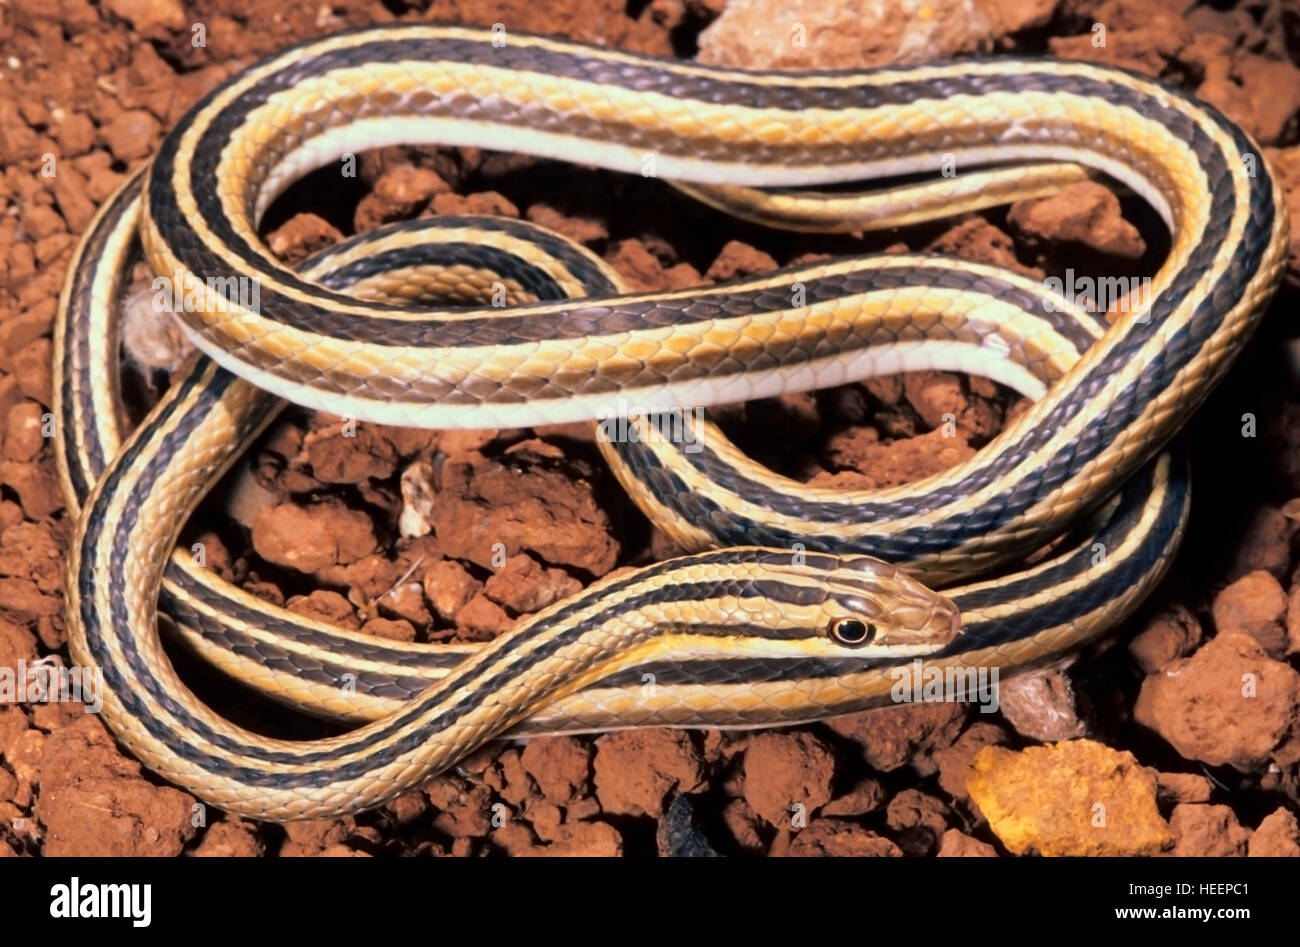 LEITH'S SAND SNAKE Psammophis leithii. Entire body - coiled. Stock Photo